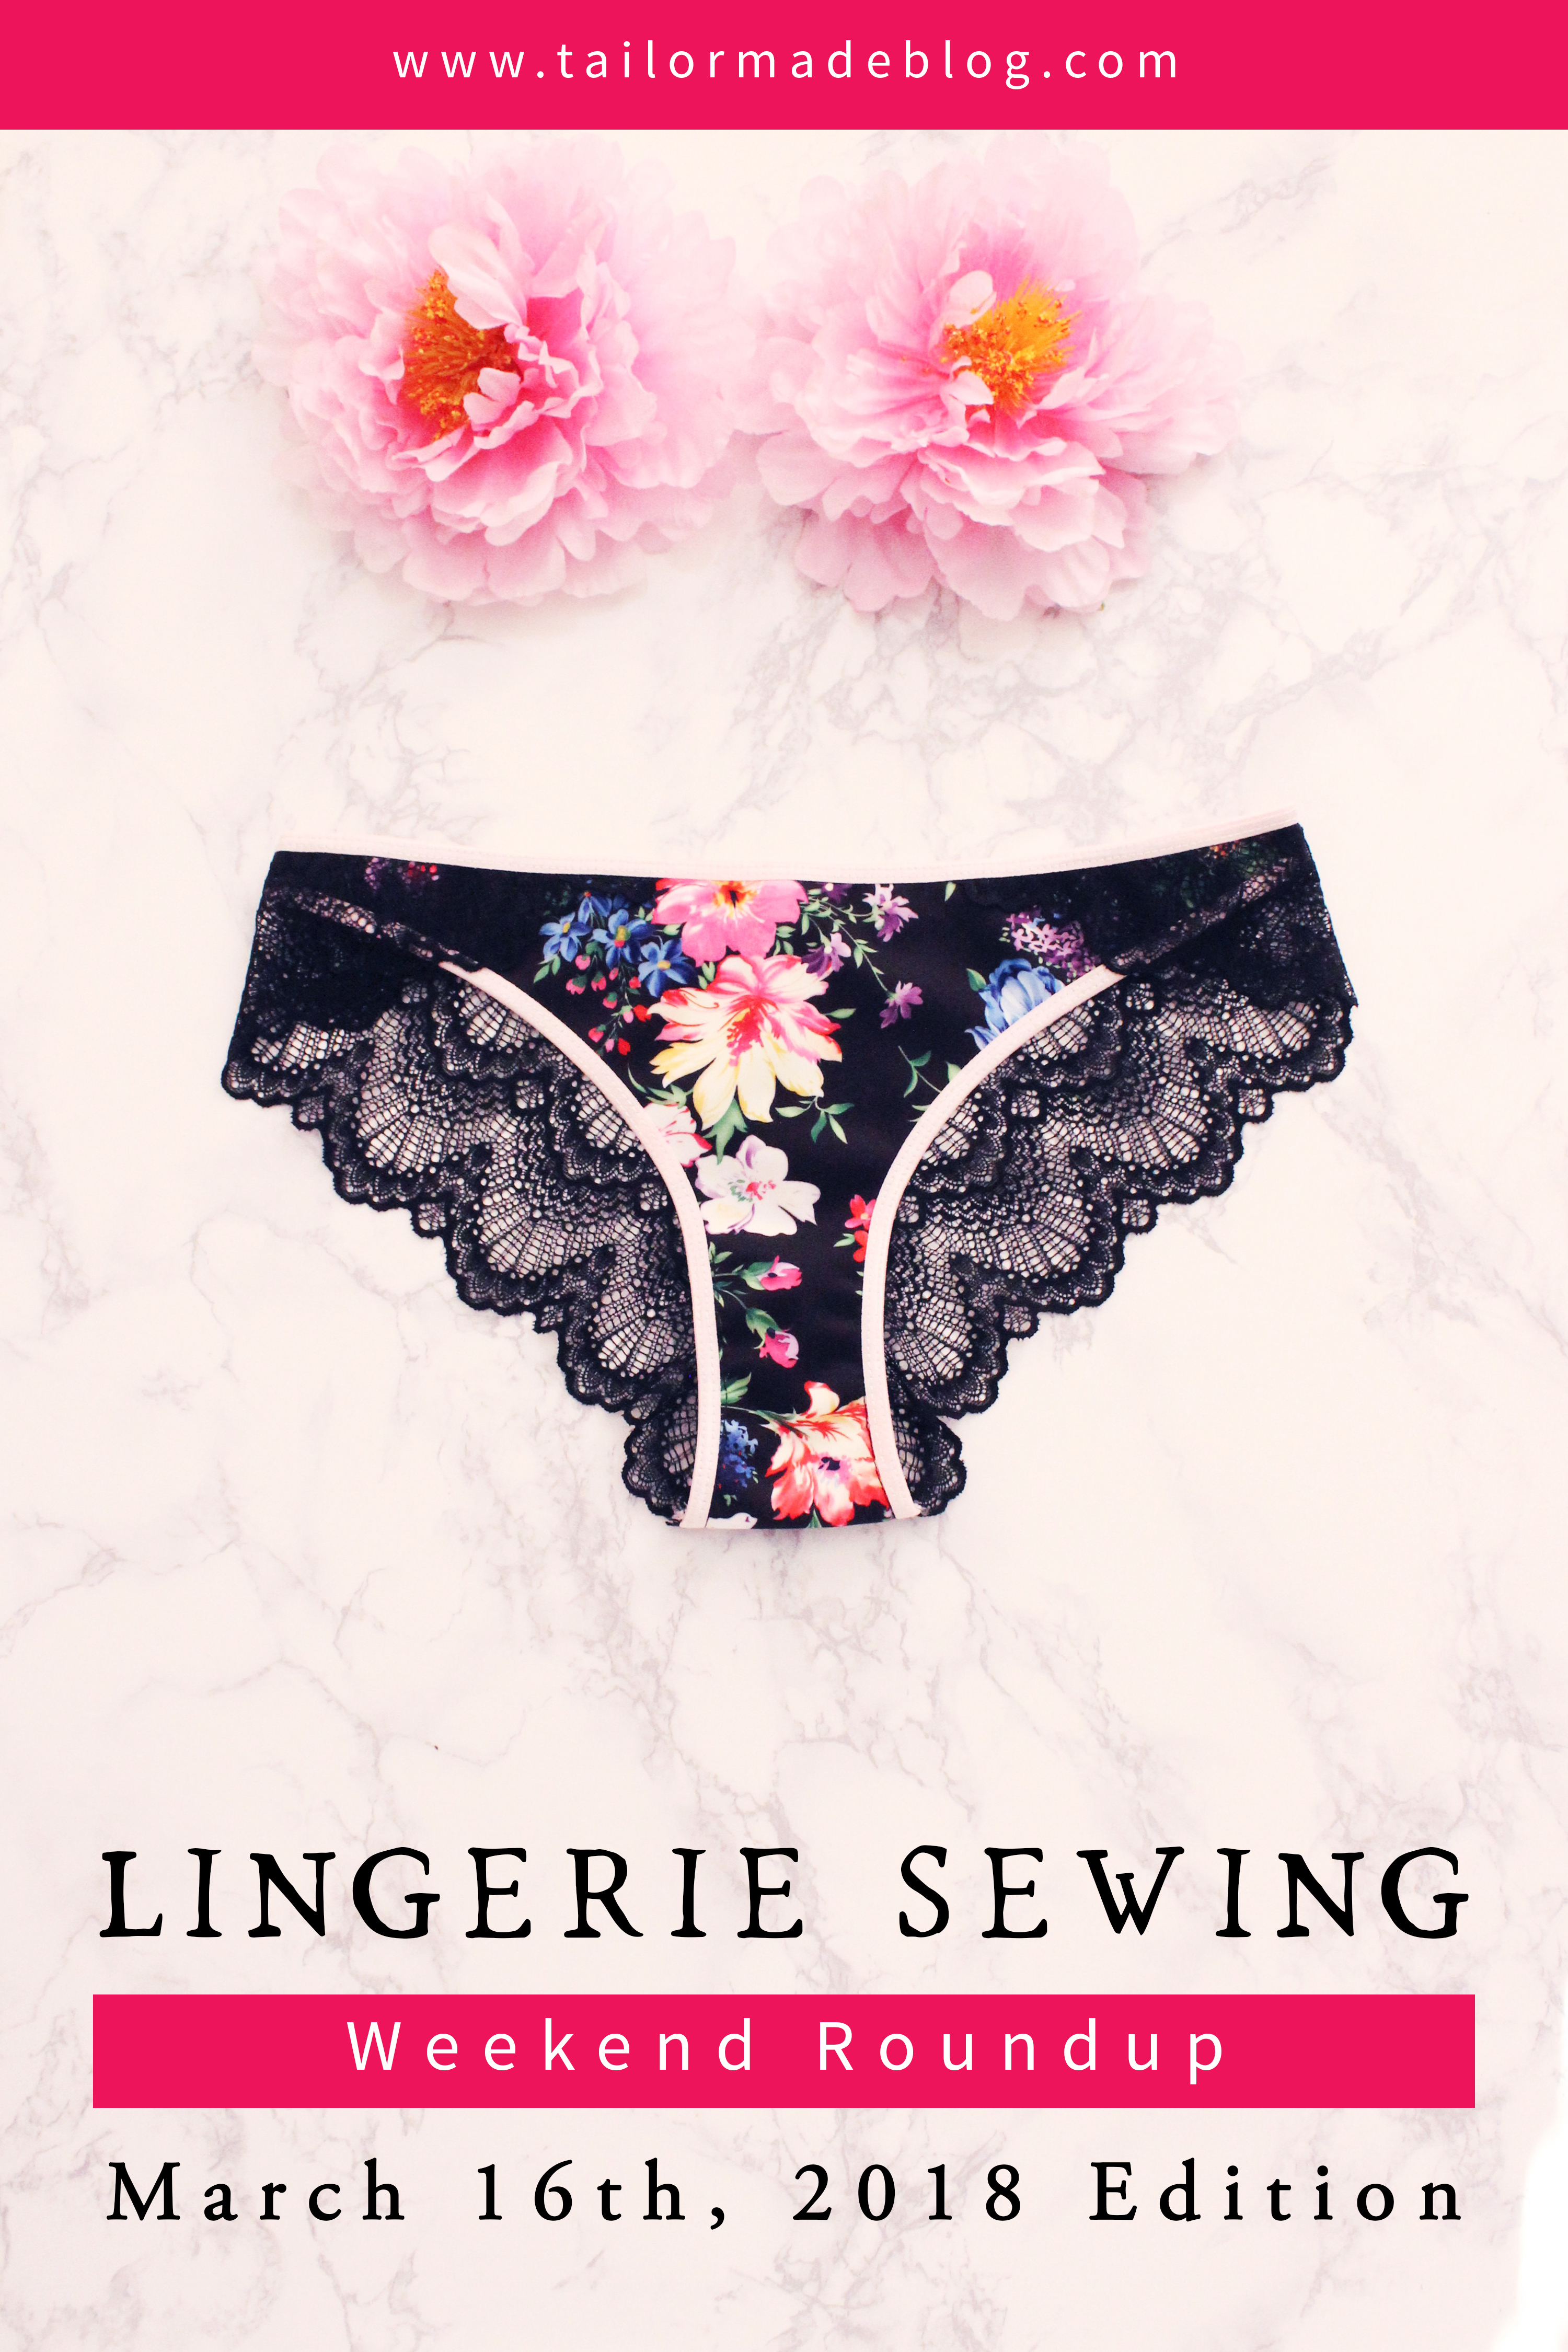 March 16th, 2018 Lingerie Sewing Weekend Round Up Latest news and makes and sewing projects from the lingerie sewing bra making community